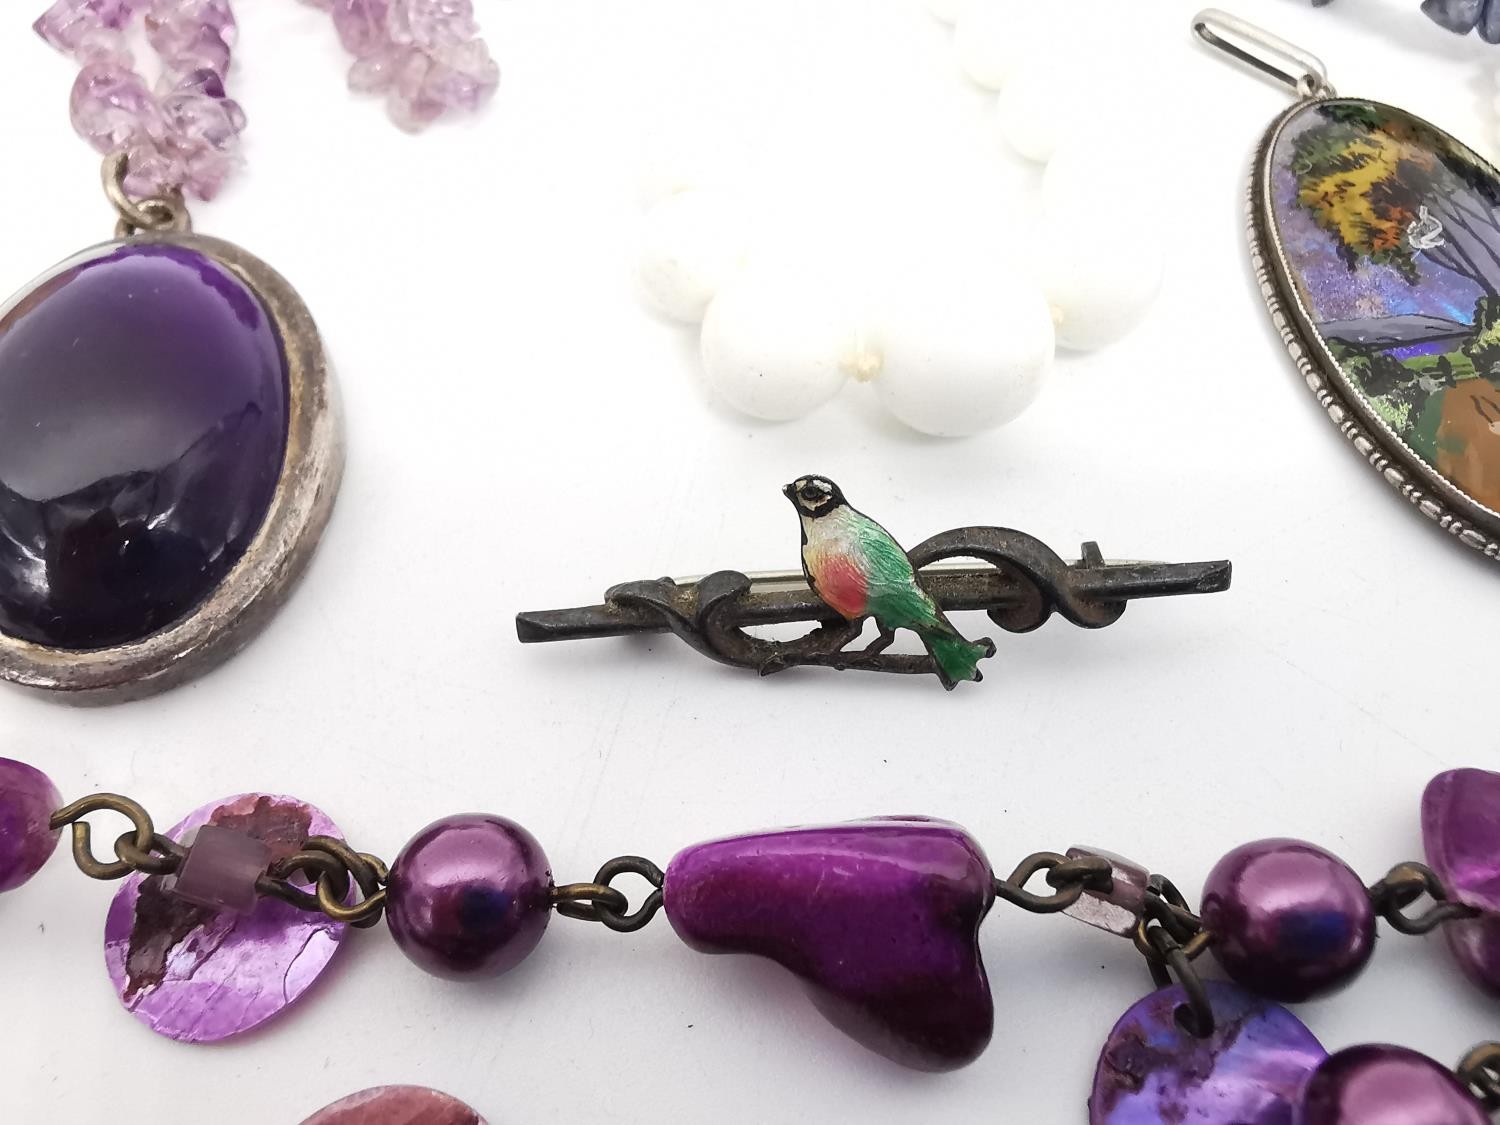 A collection of vintage jewellery, including an amethyst chips necklace with amethyst pendant, a - Image 5 of 11